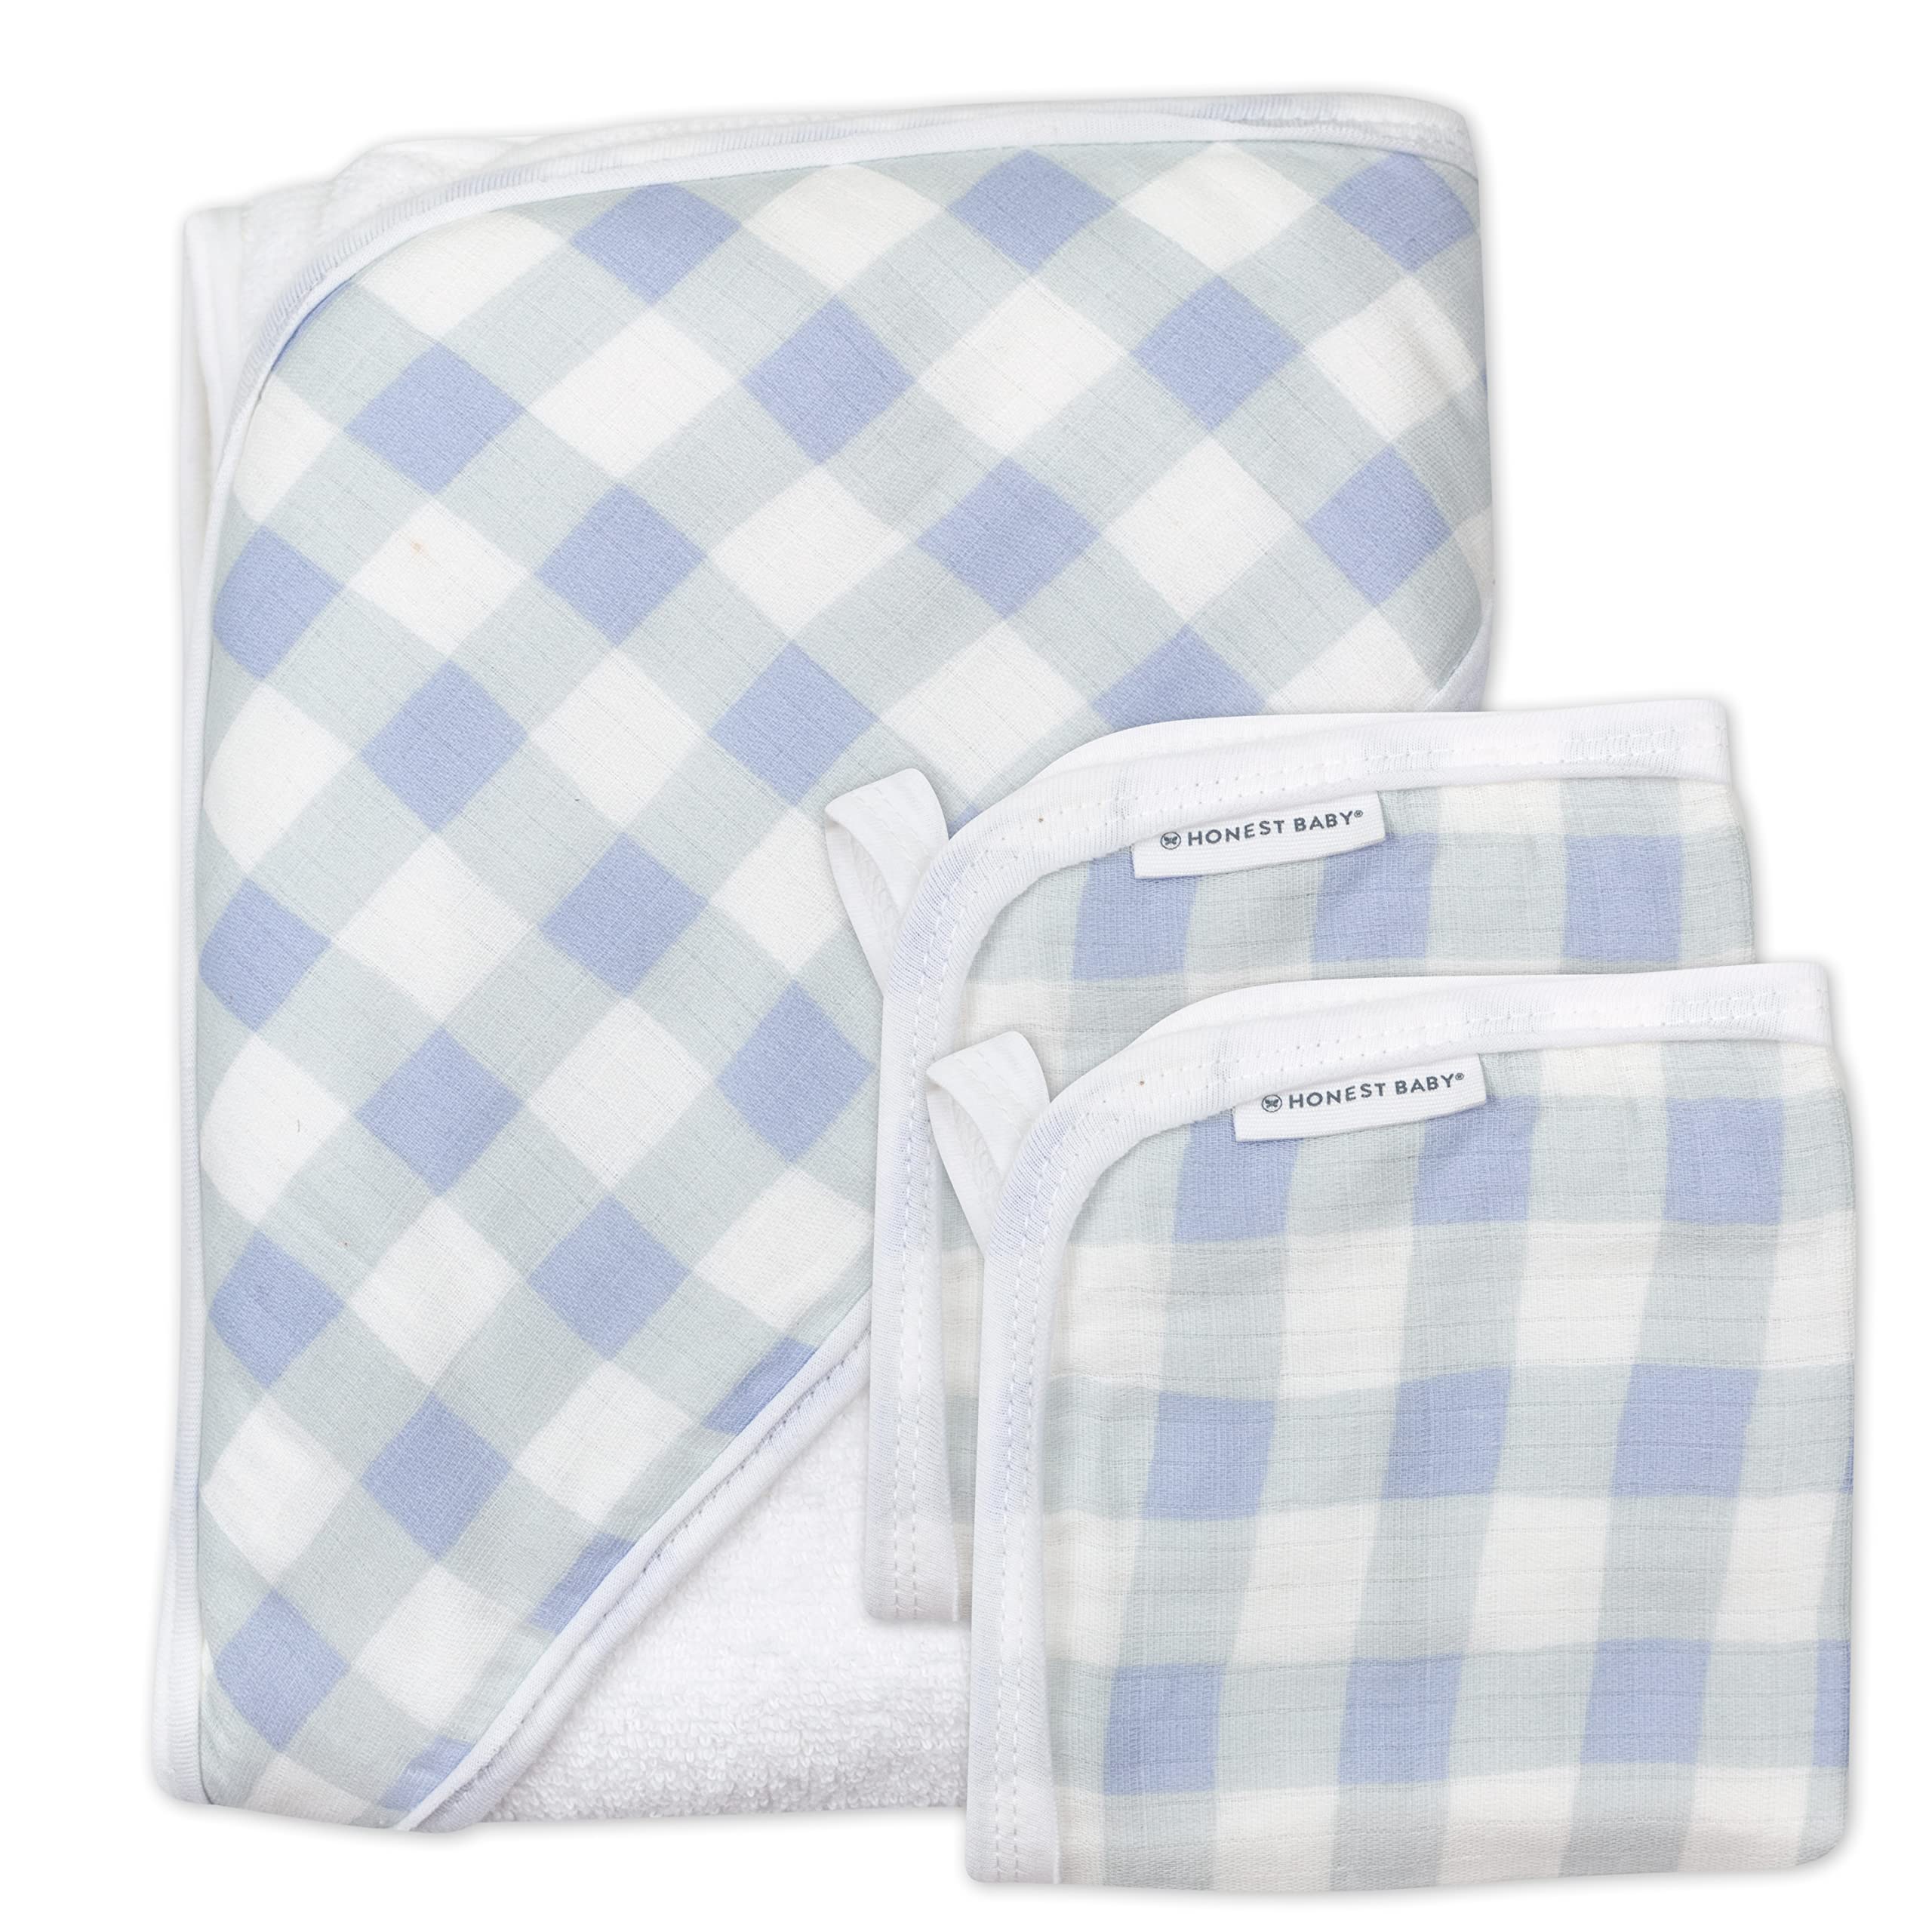 3-Piece HonestBaby Organic Cotton Hooded Towel & Washcloth Set, Blue Painted Buffalo Check, One Size $10.62 + Free Shipping w/ Prime or on $35+